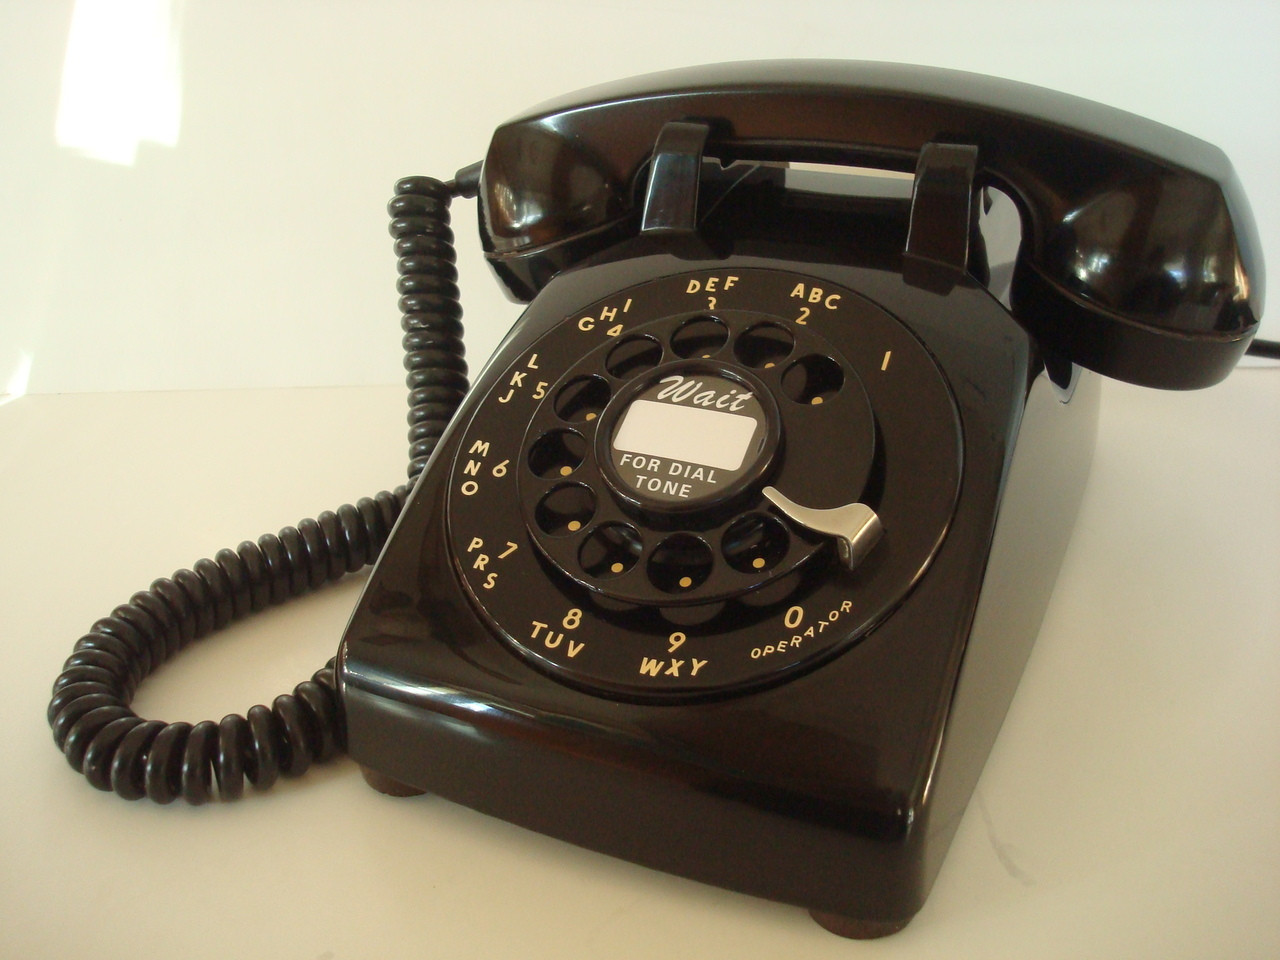 Western Electric Telephone 500 Rotary Phone Fully Restored Bakelite Handset Telephone From The 1950s Old Phone Shop